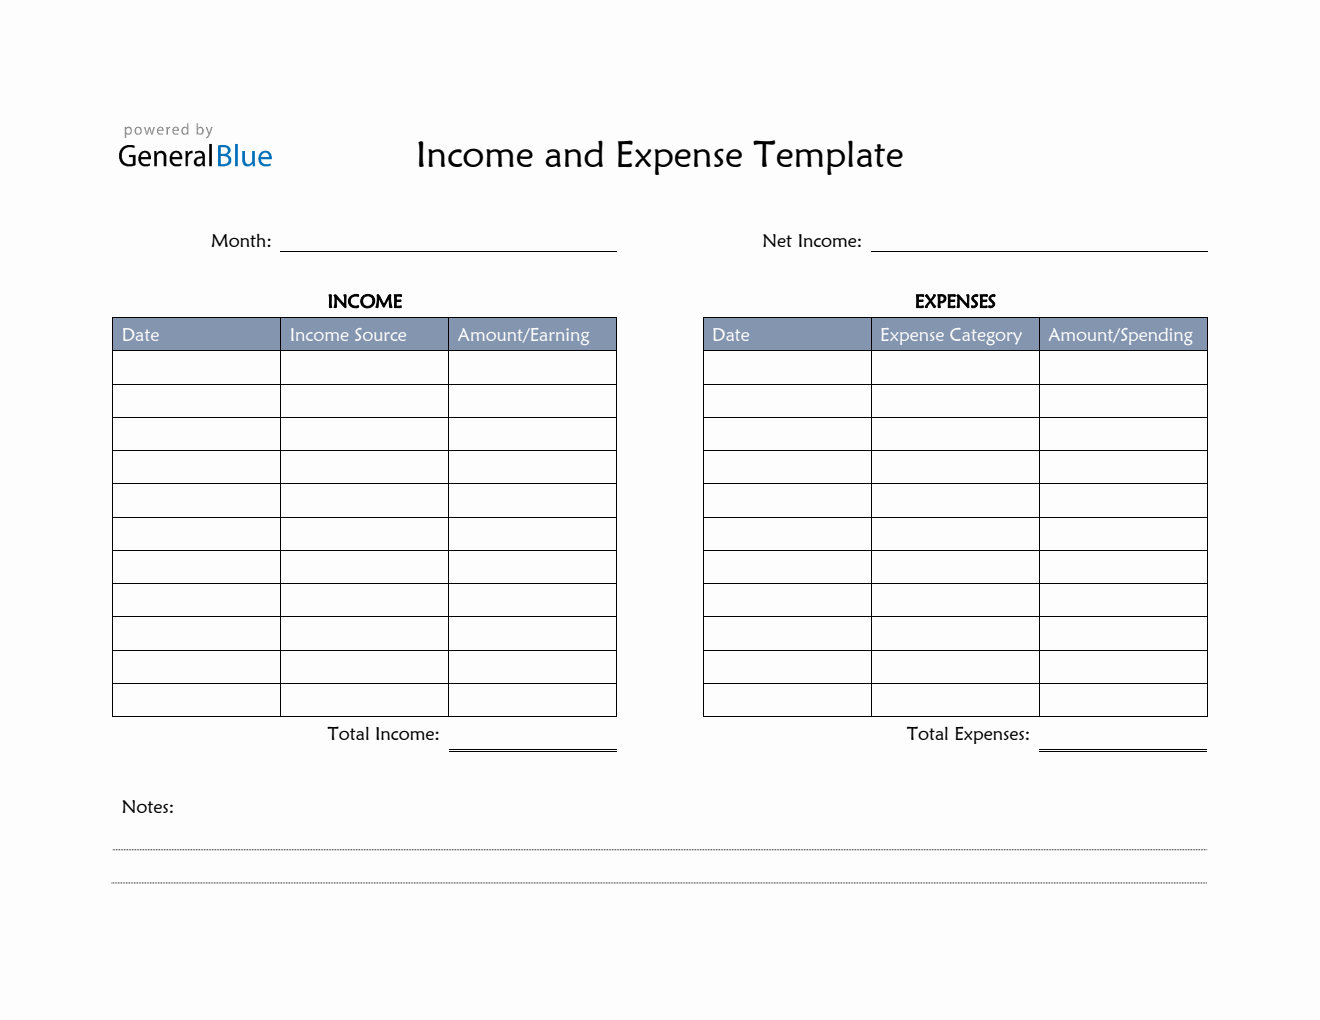 Simple Income and Expense Template in PDF